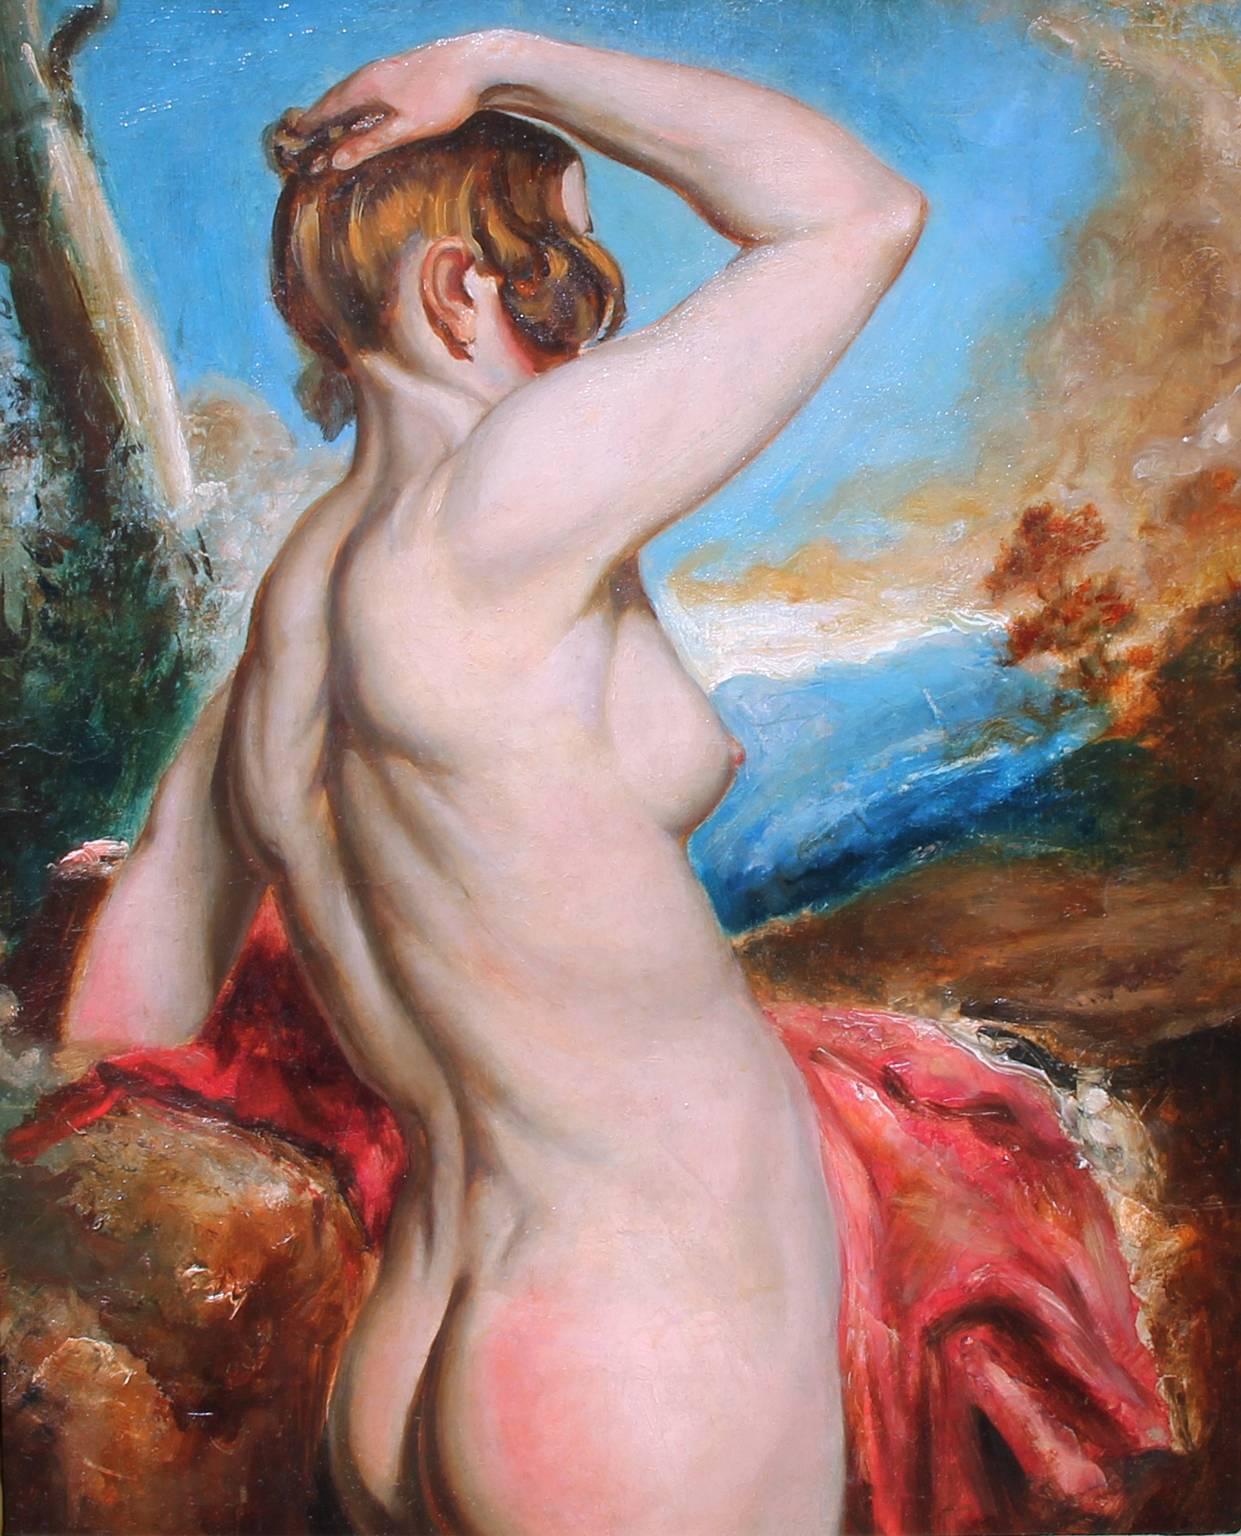 William Etty R.A. Nude Painting - Female Nude with Red Drapery, Oil on Board, British